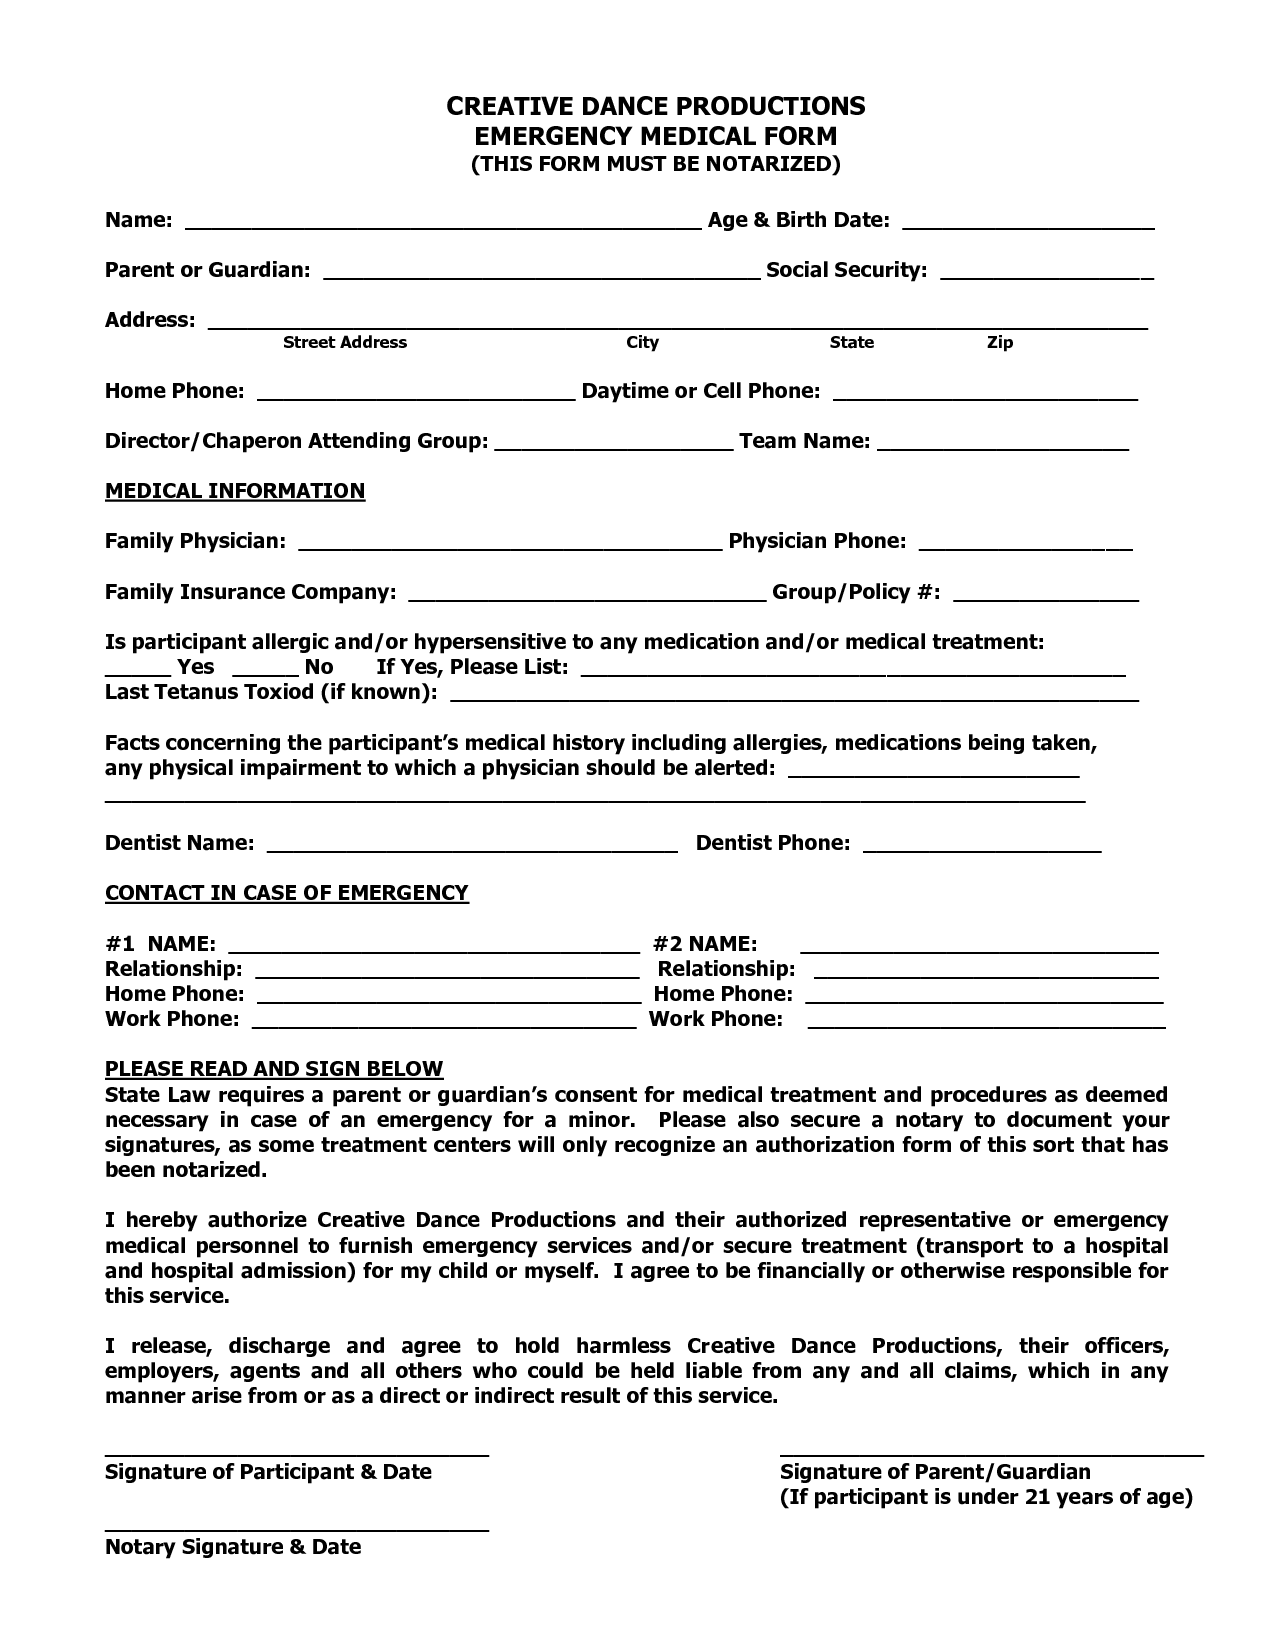 Medical Treatment Consent Free Printable Documents